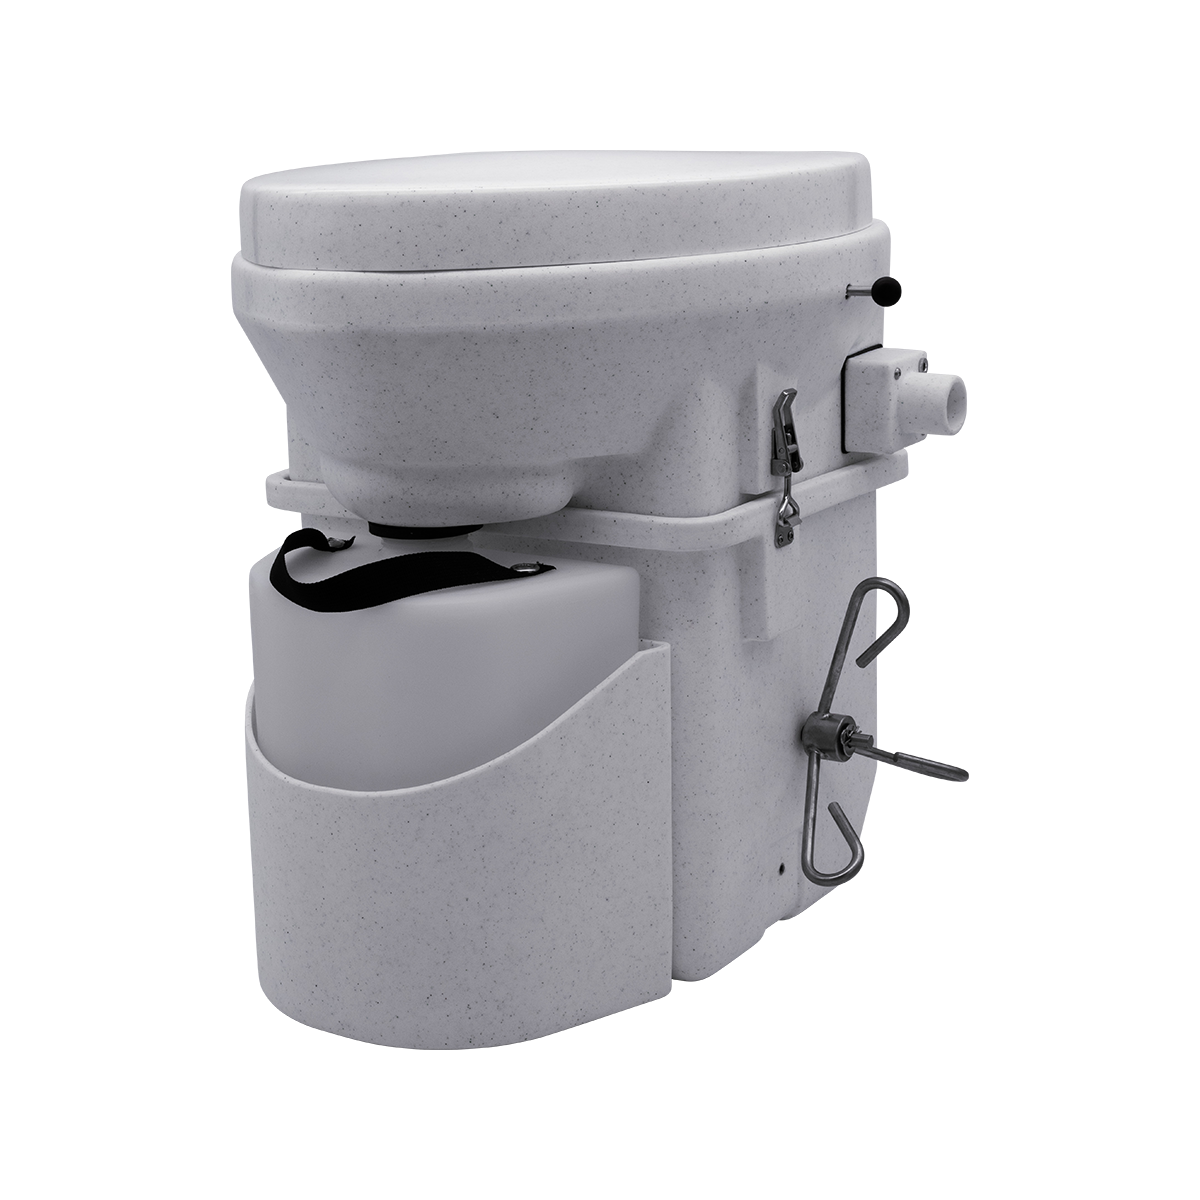 Natures Head marine composting toilet with foot spider handle